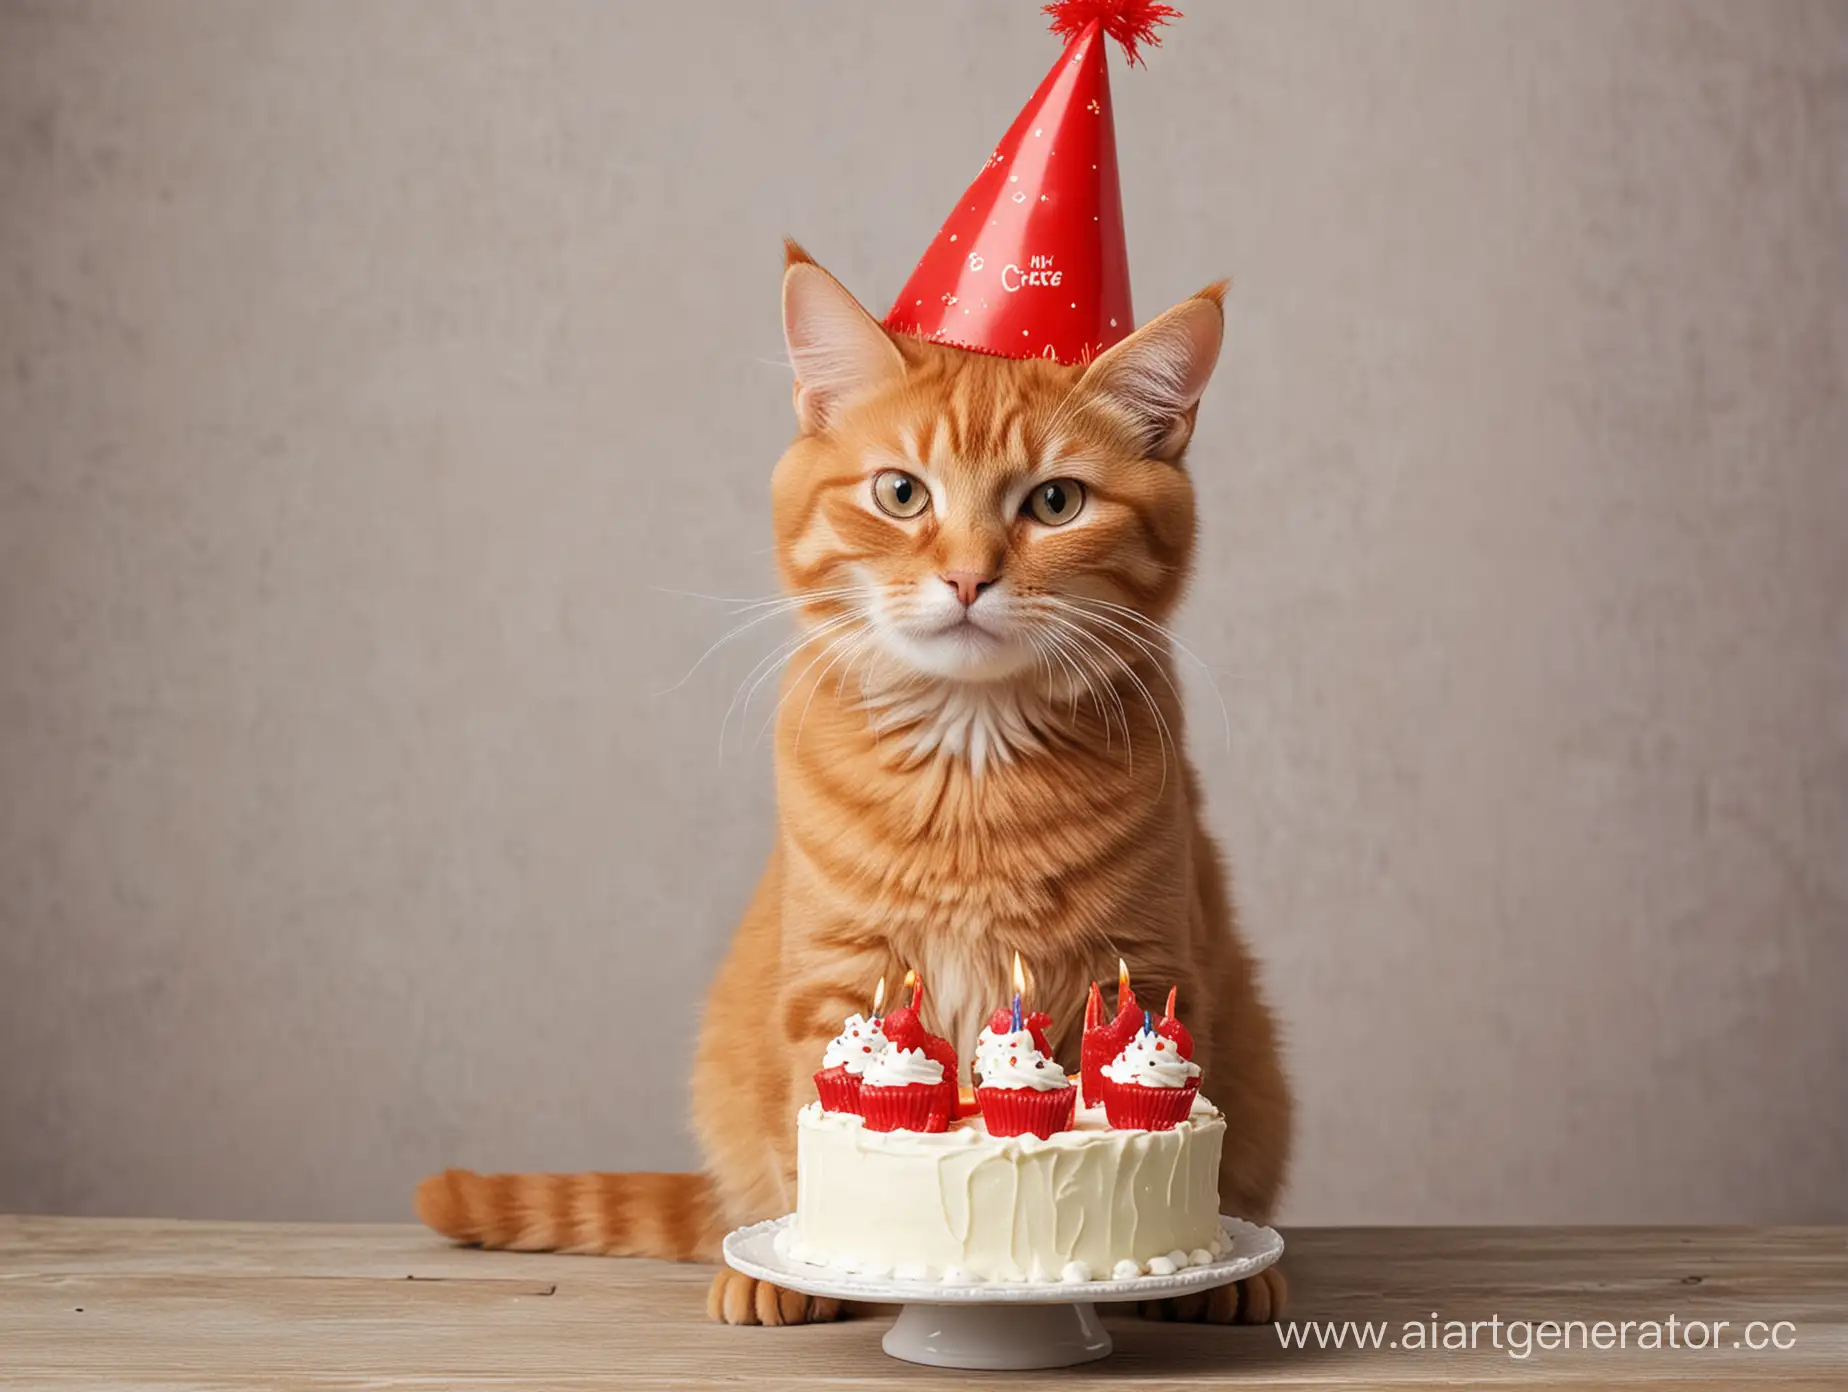 Adorable-Red-Cat-in-Birthday-Hat-Holding-Cake